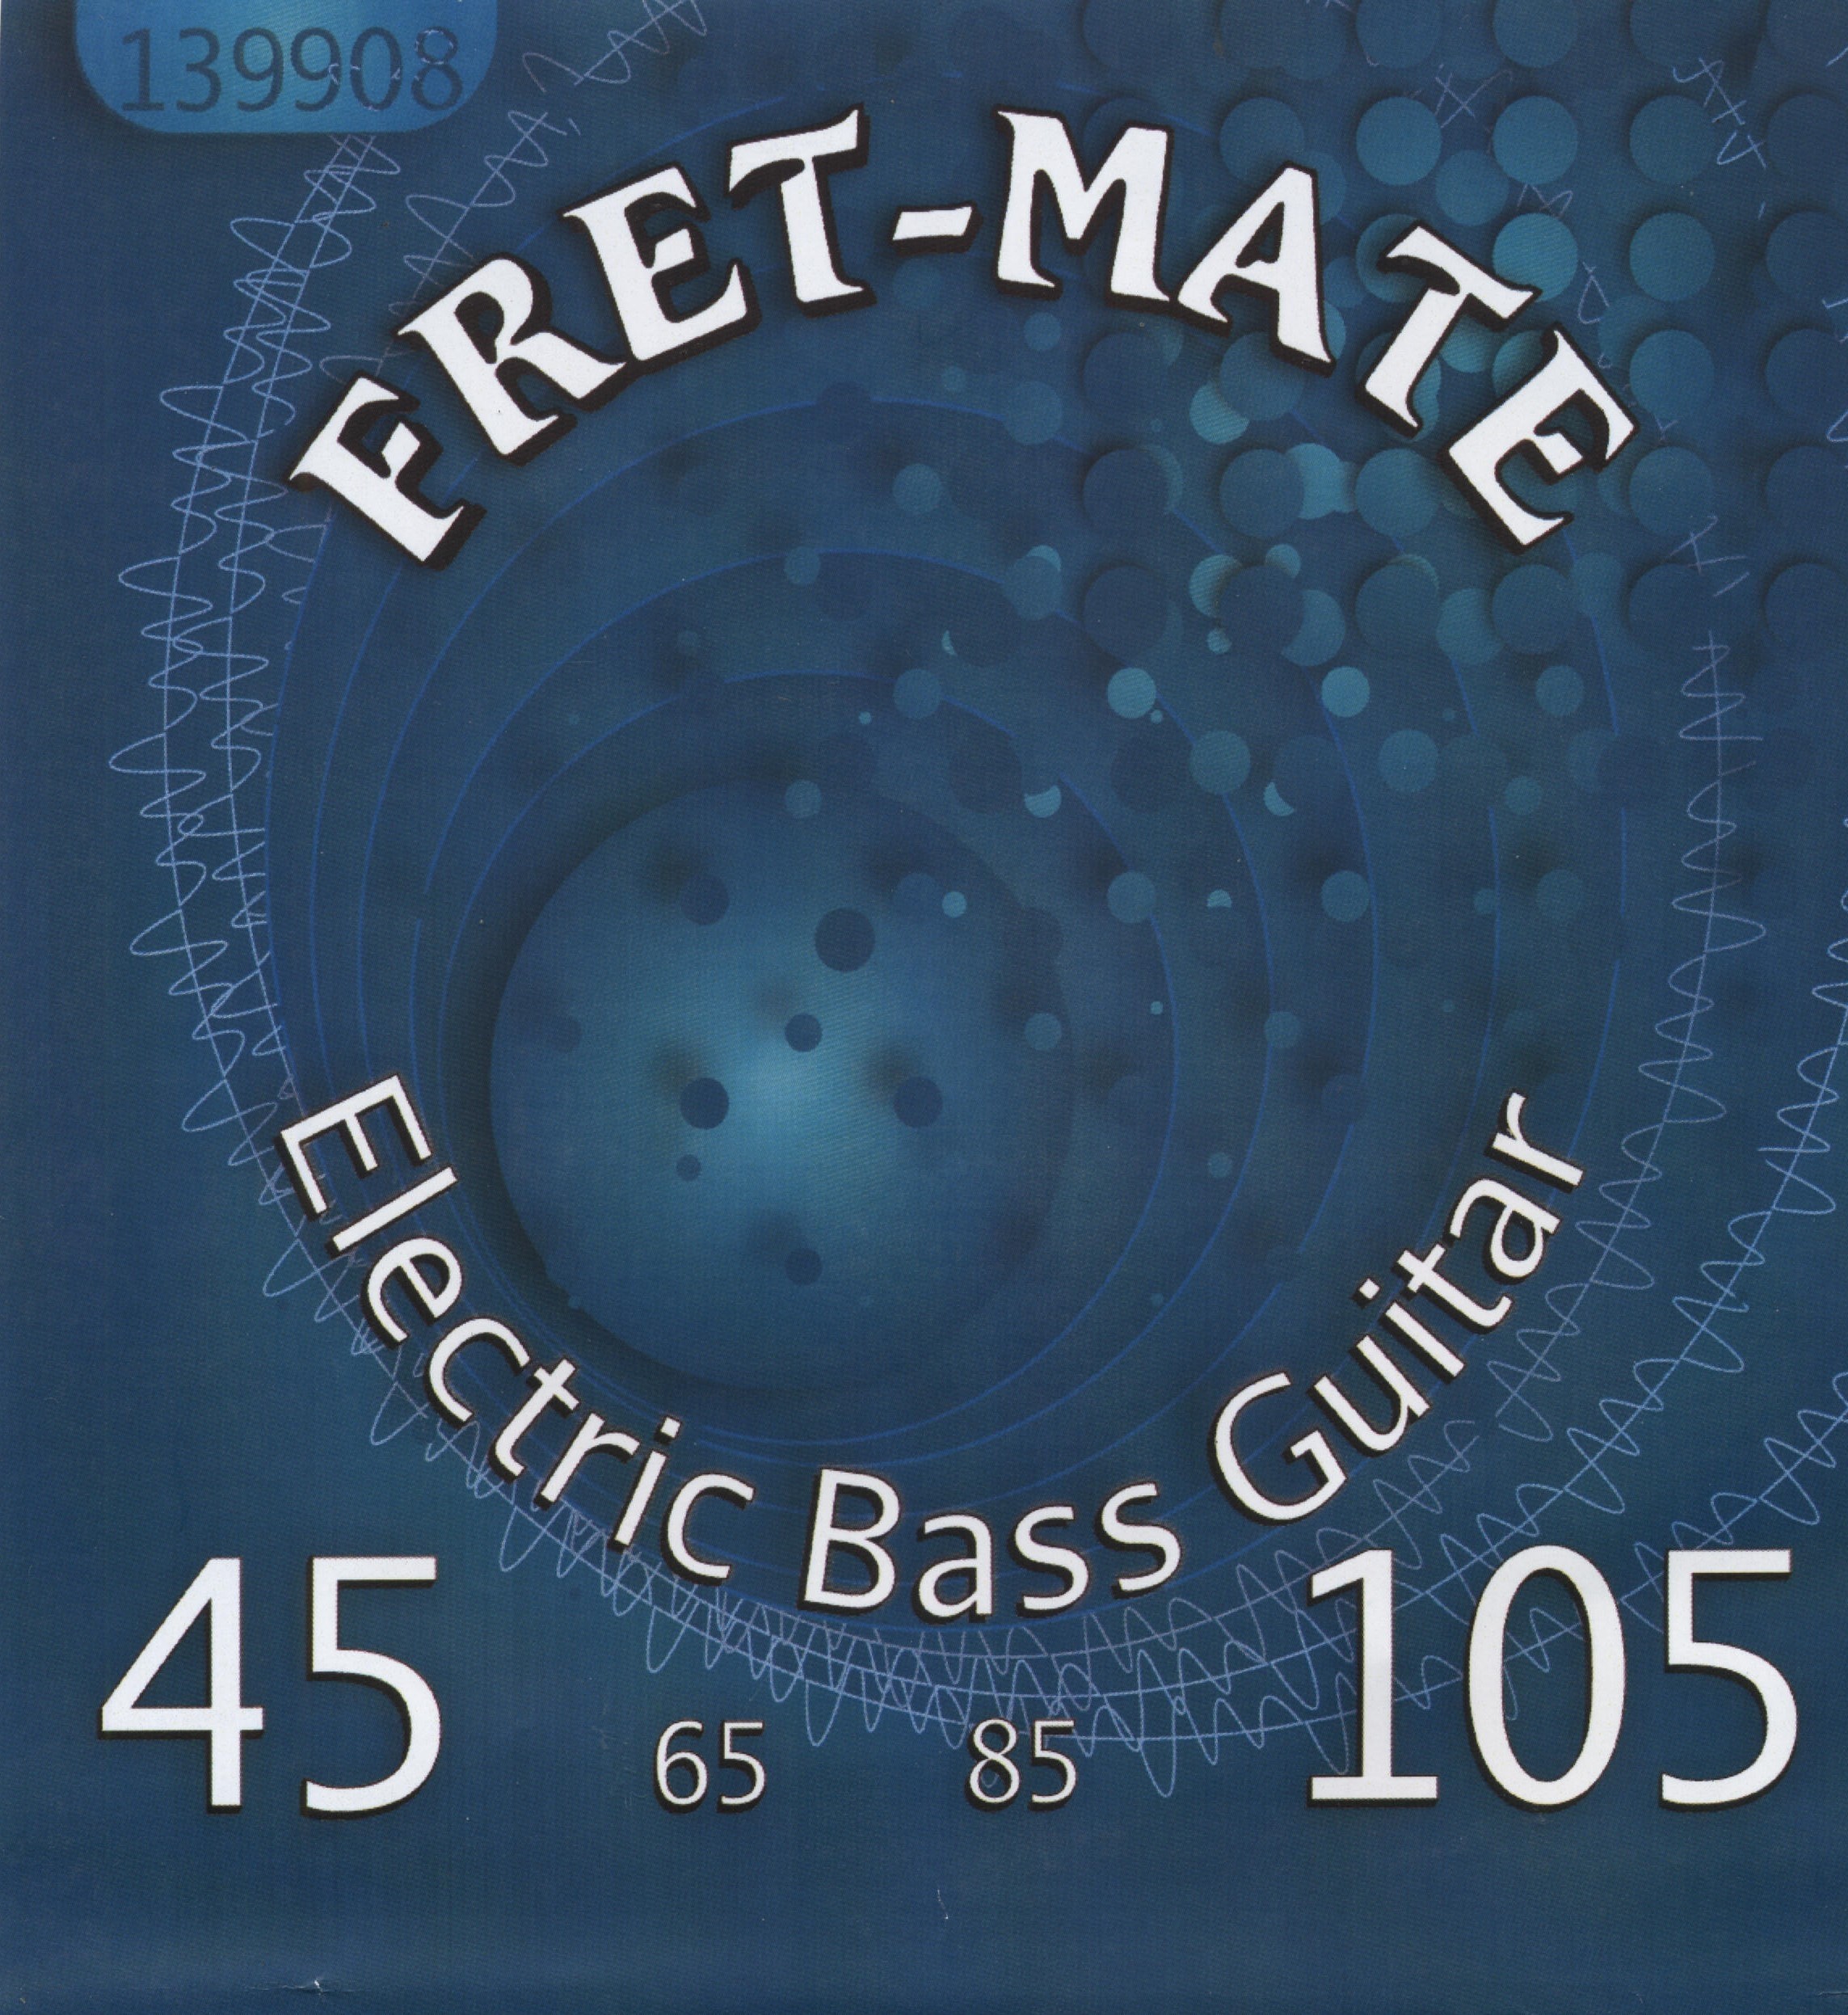 Fret-Mate 45-105 Electric Bass Strings